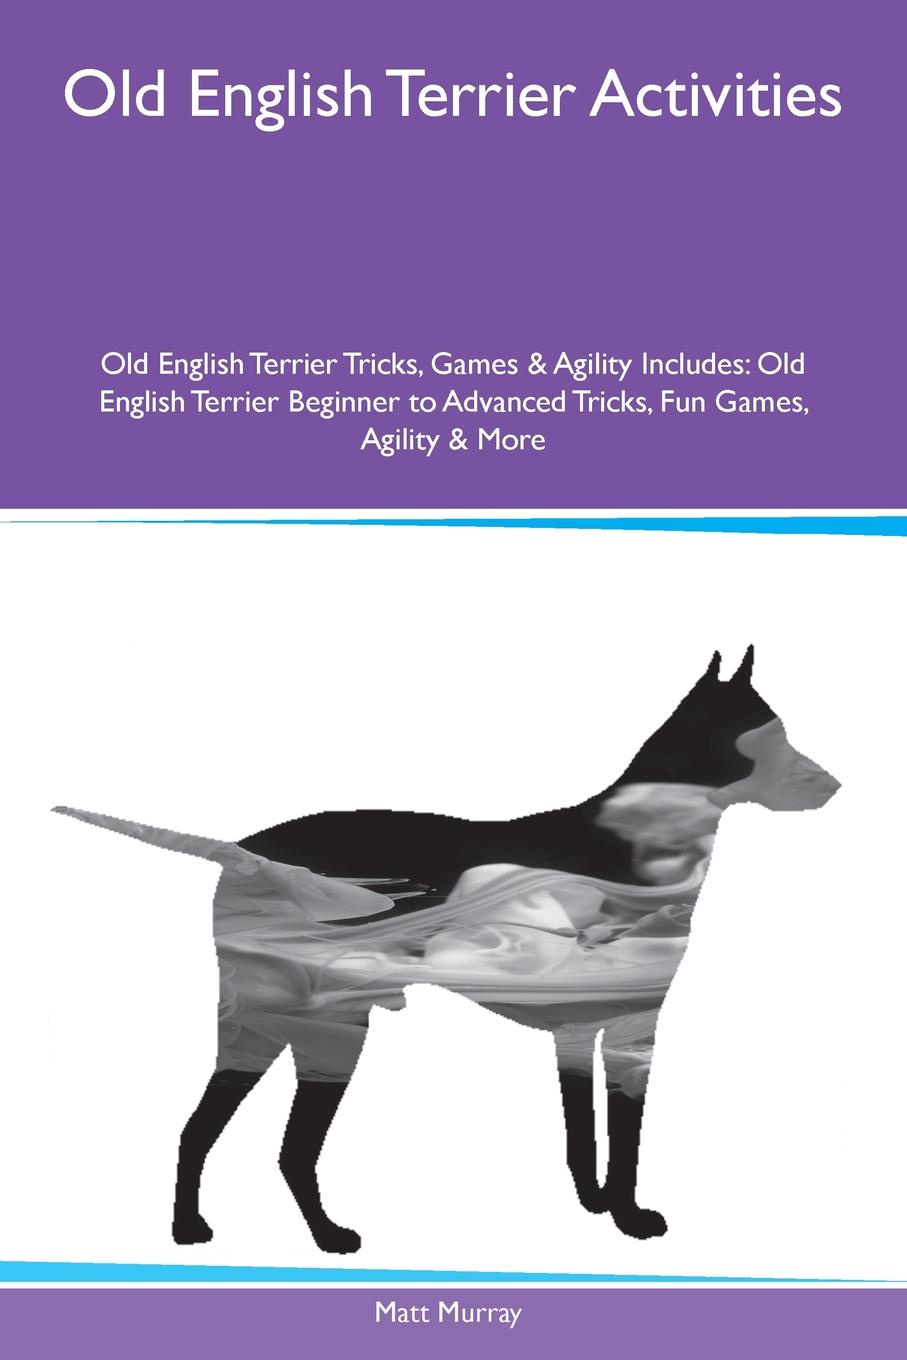 Old English Terrier Activities Old English Terrier Tricks, Games & Agility Includes. Old English Terrier Beginner to Advanced Tricks, Fun Games, Agility & More